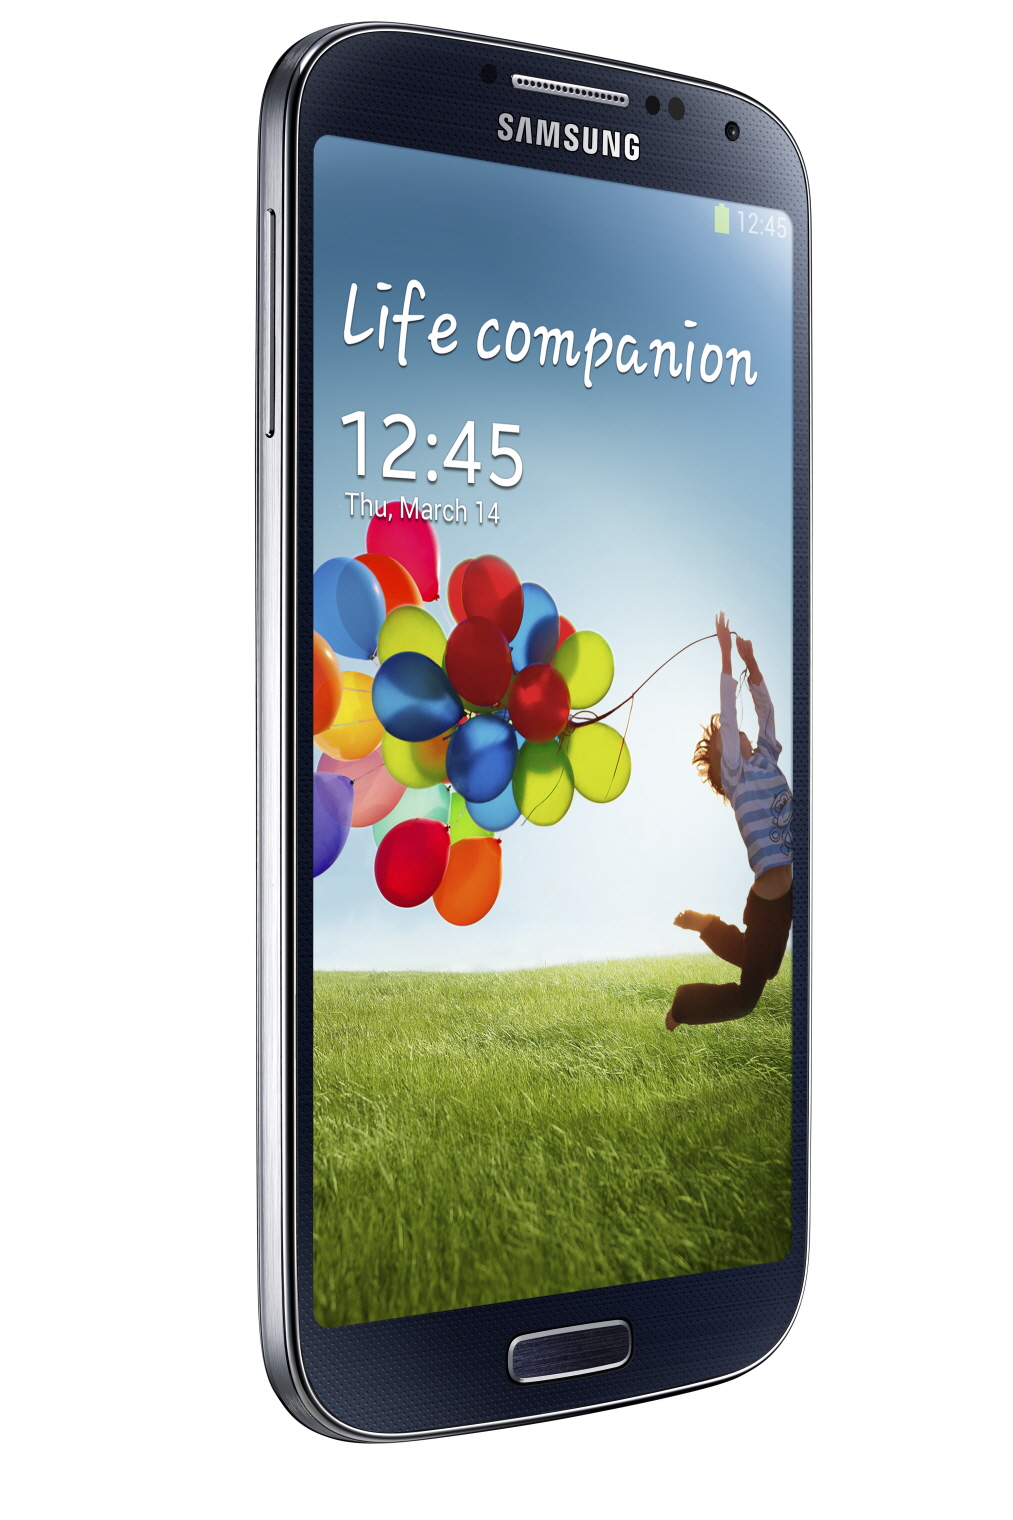 GALAXY S 4 Product Image2